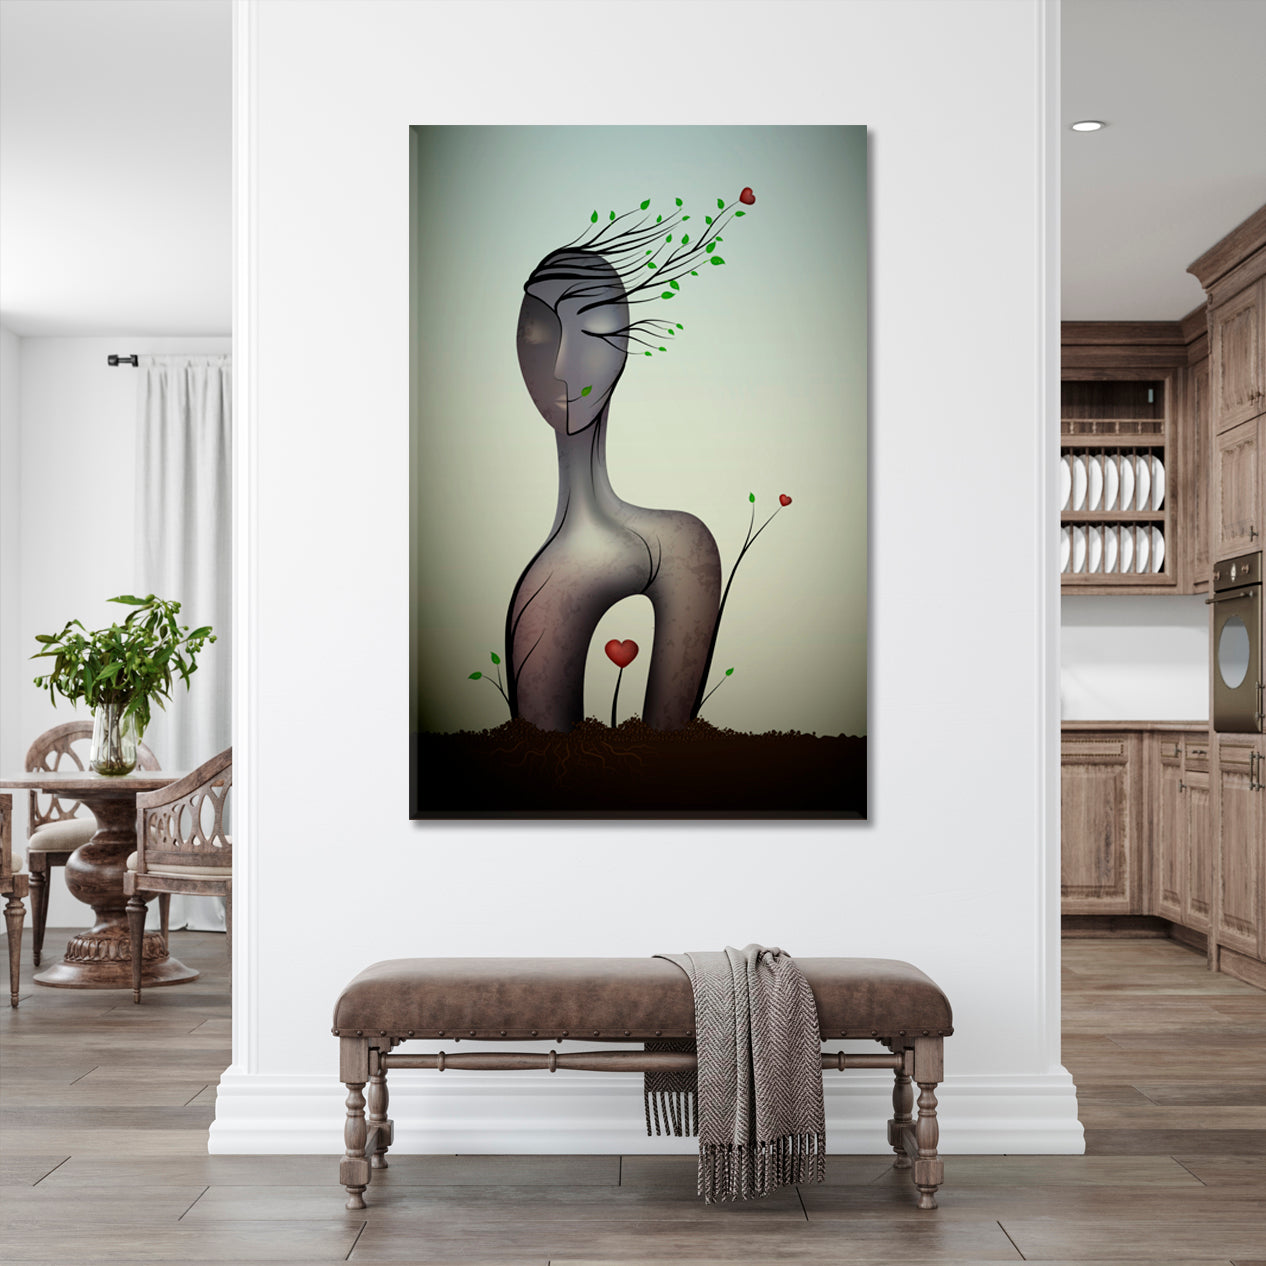 IN LOVE Woman Shapes Abstract Contemporary Surrealism Surreal Fantasy Large Art Print Décor Artesty   